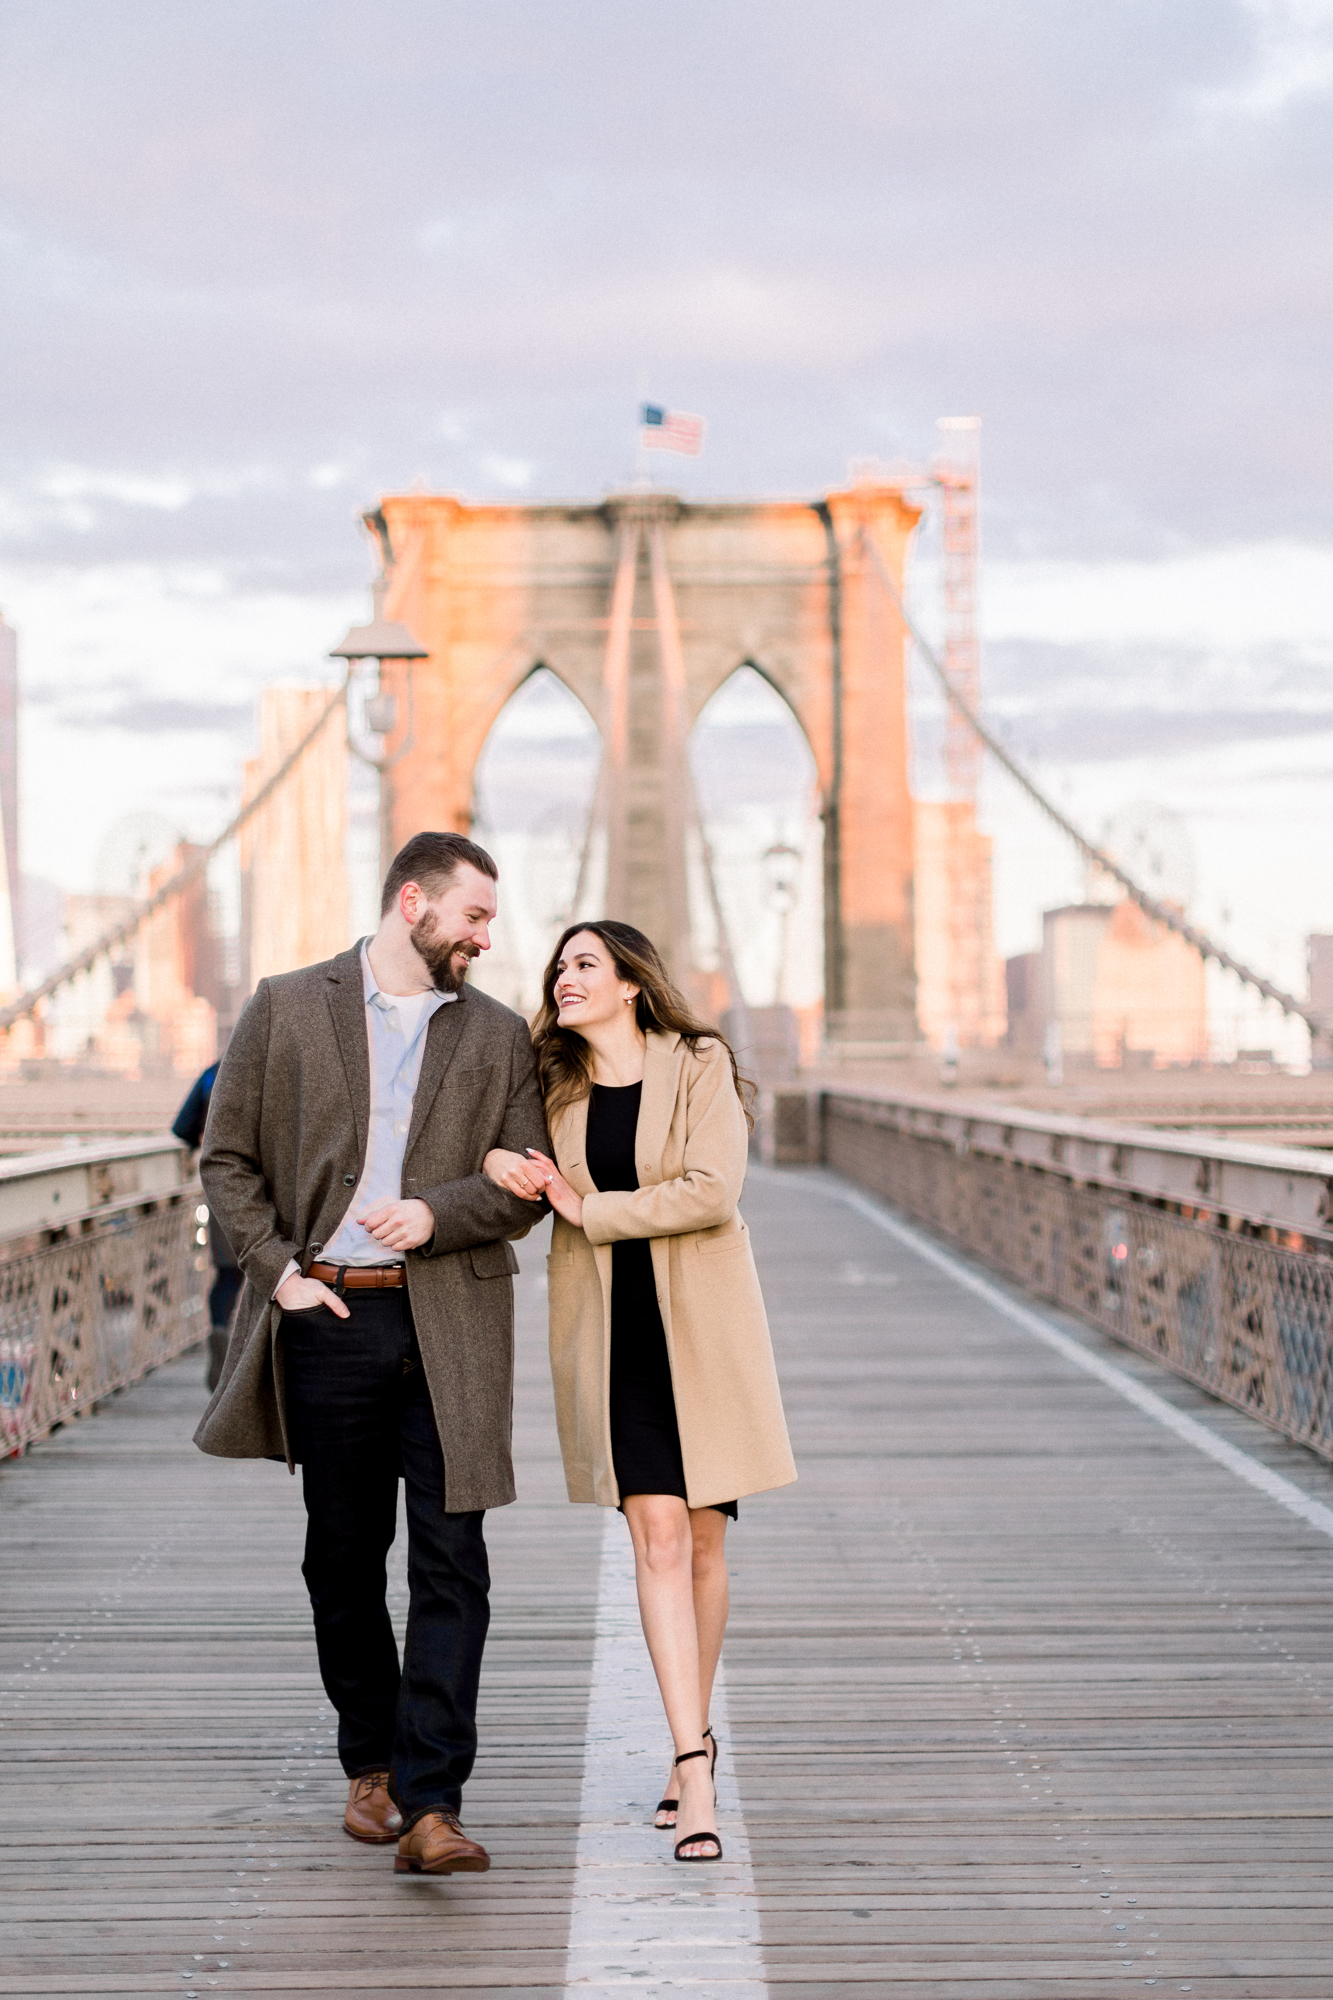 Sunrise engagement photos on the Brooklyn Bridge early in the morning